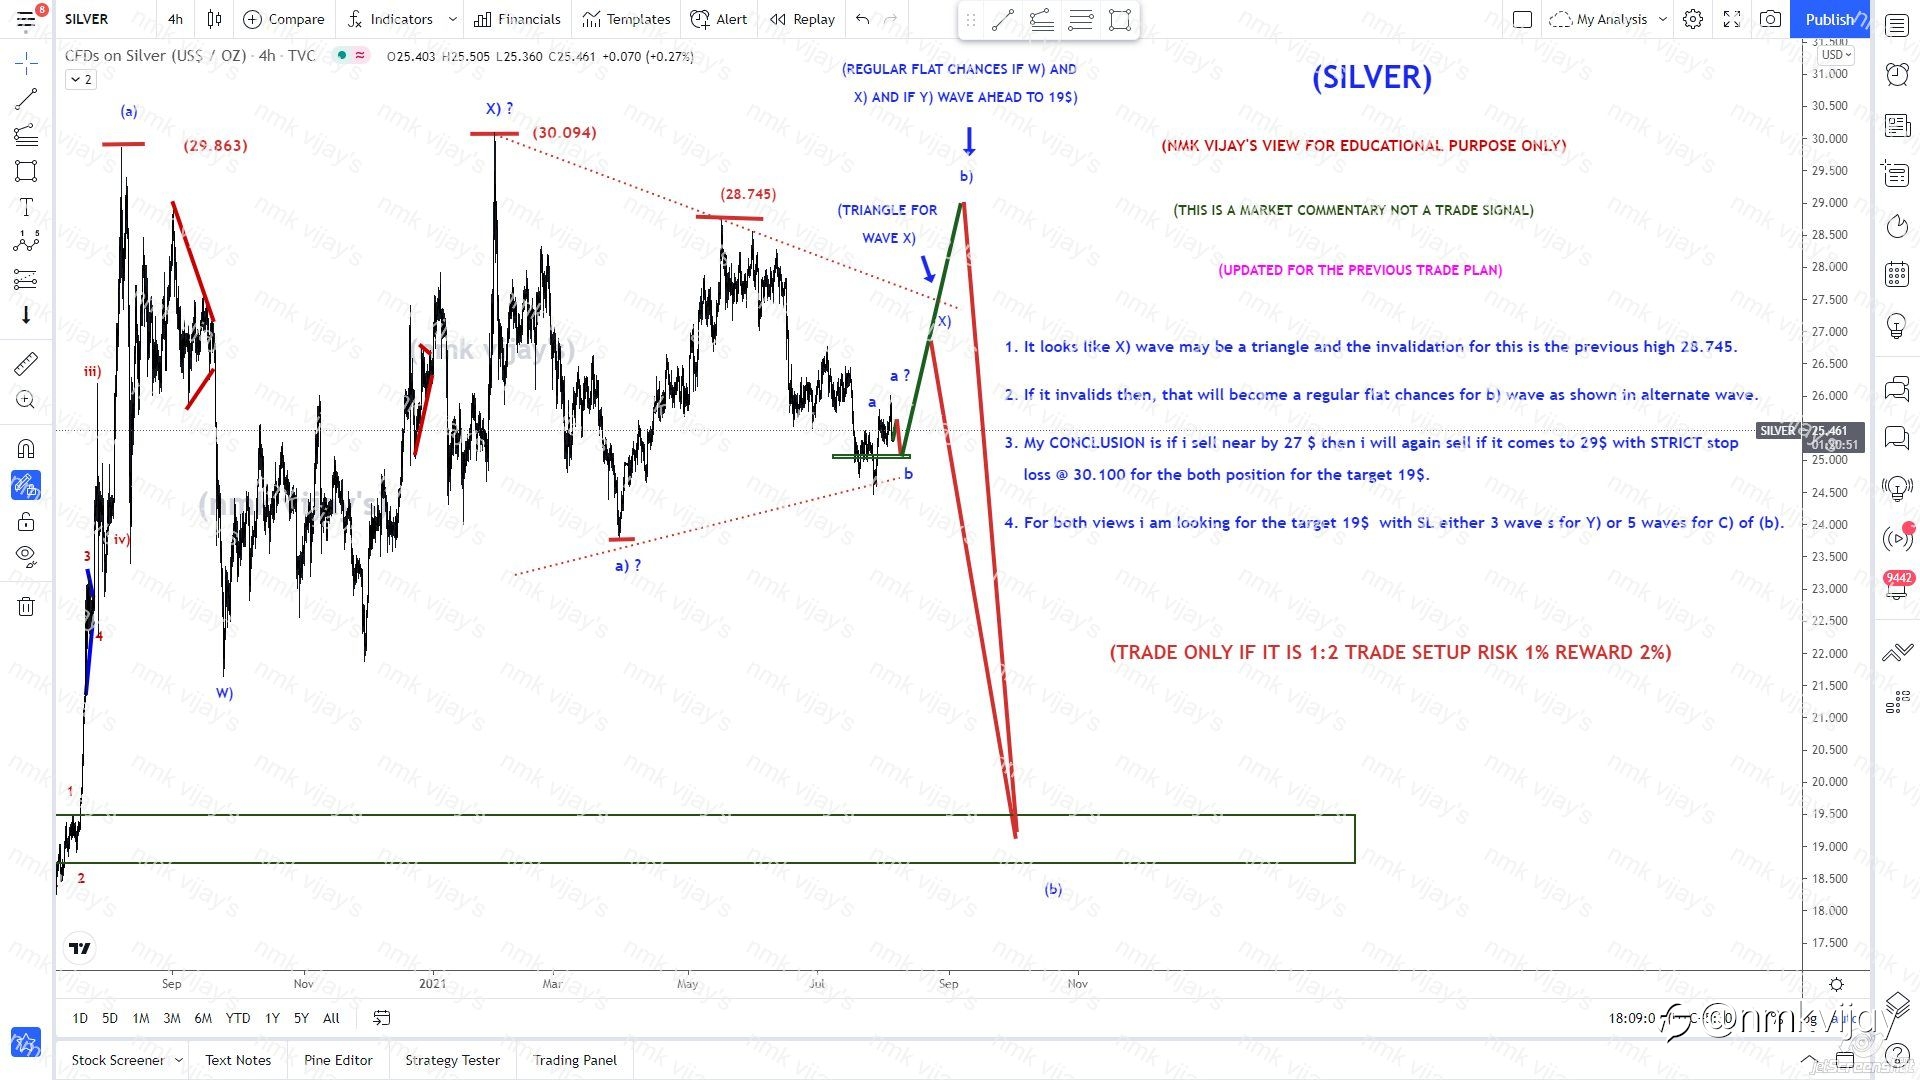 SILVER-Seems we are in wave X) as a triangle or b) ?